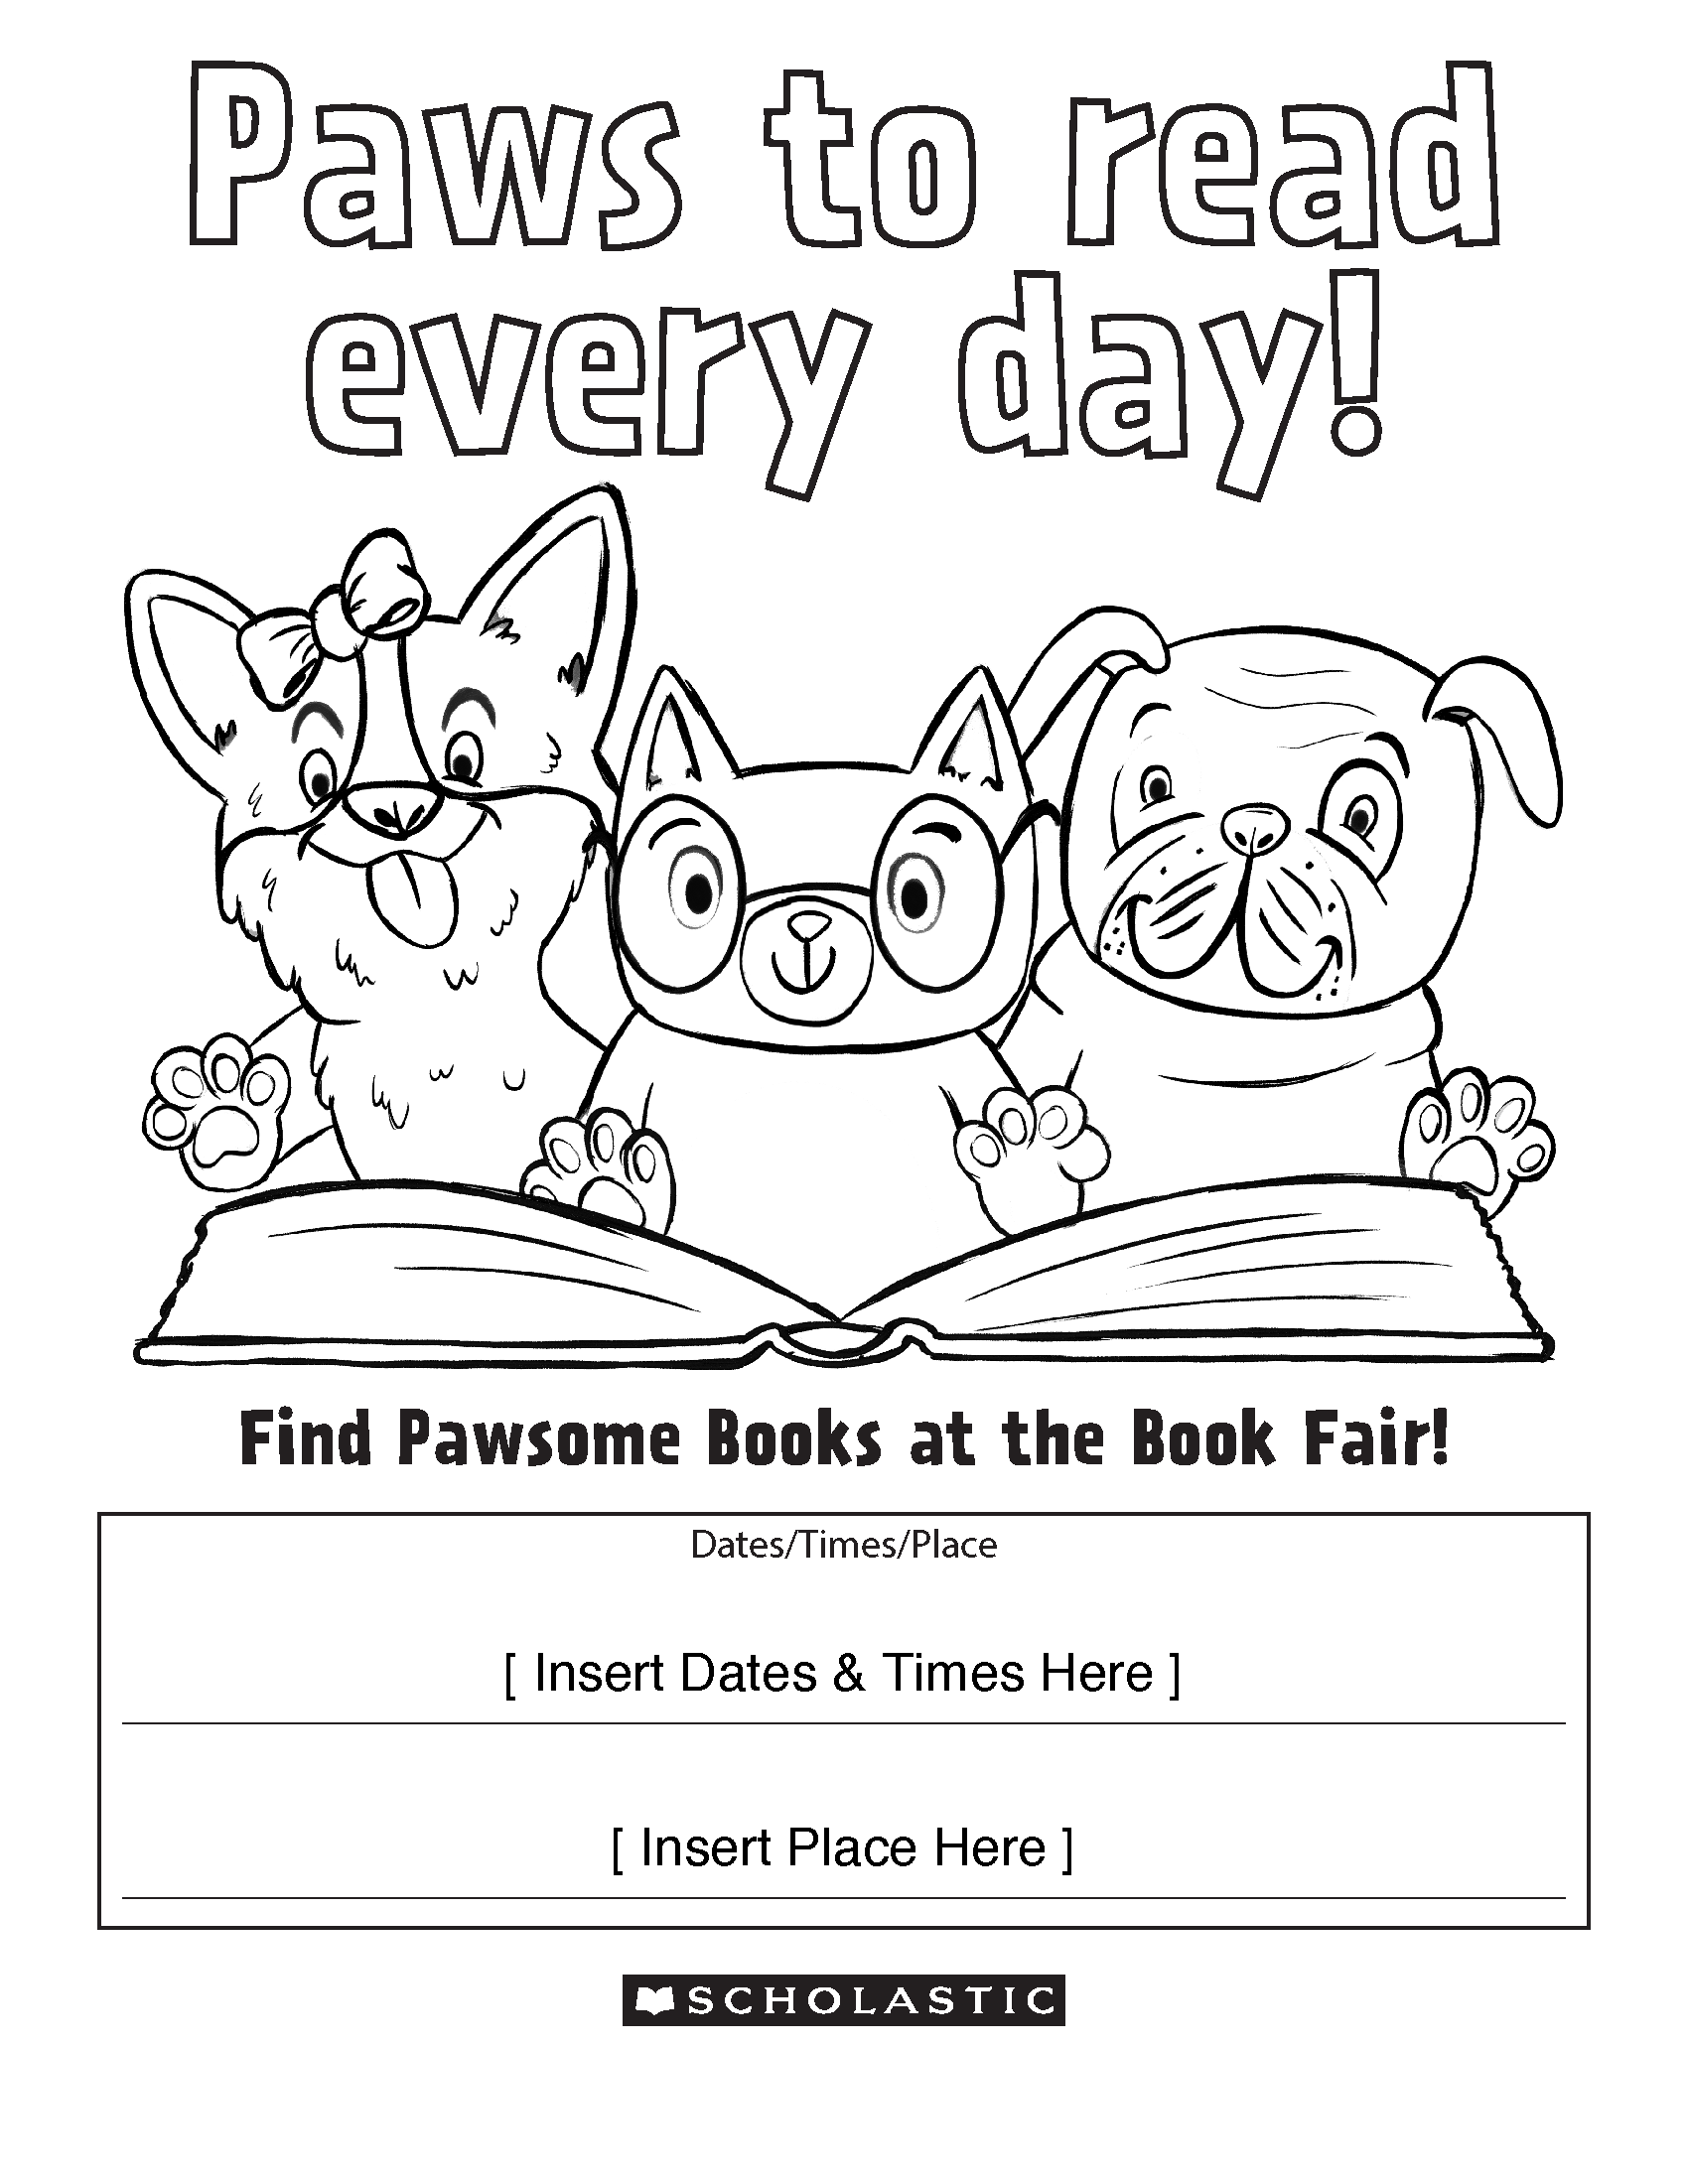 Colouring page dogs and cat reading 1 bw Colouring page dogs and cat reading